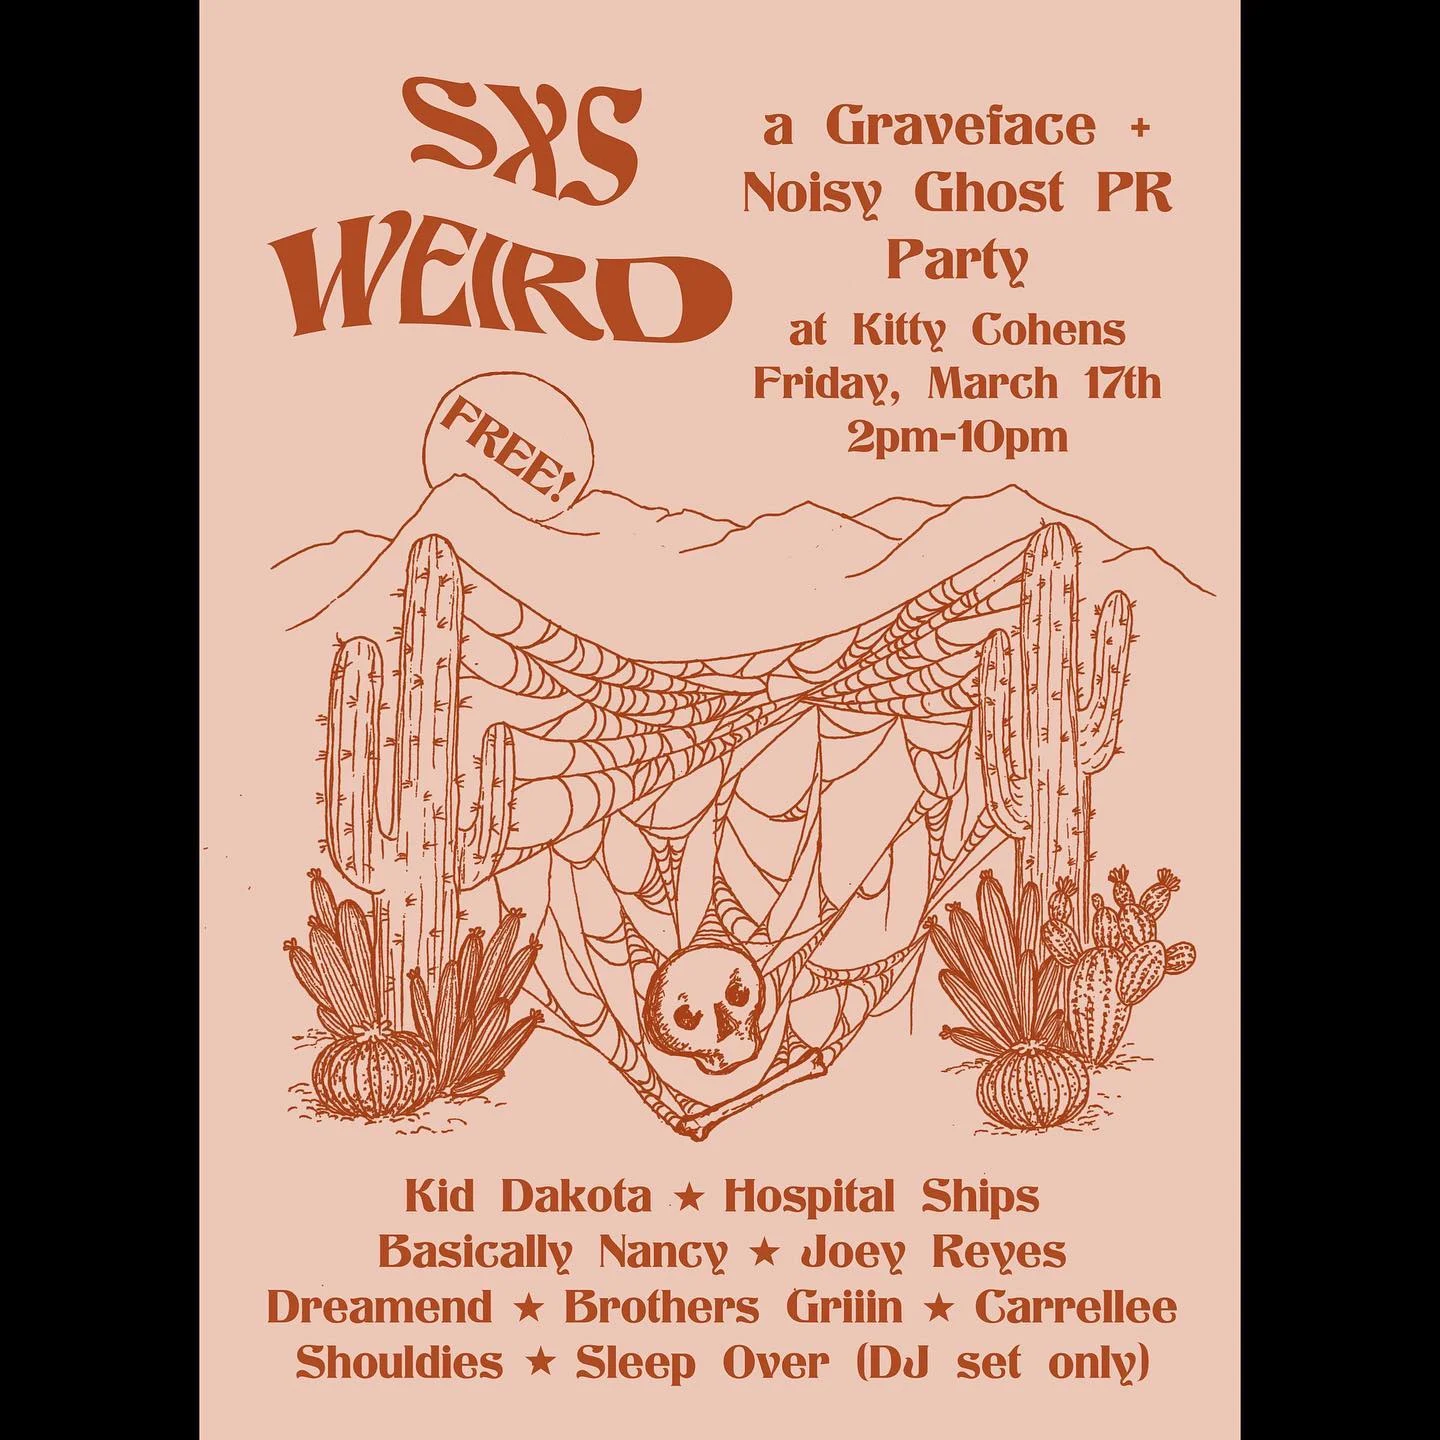 SXSWeird: A Graveface + Noisy Ghost PR Party at Kitty Cohens, Fridy, March 17, 2023, 2pm to 10pm